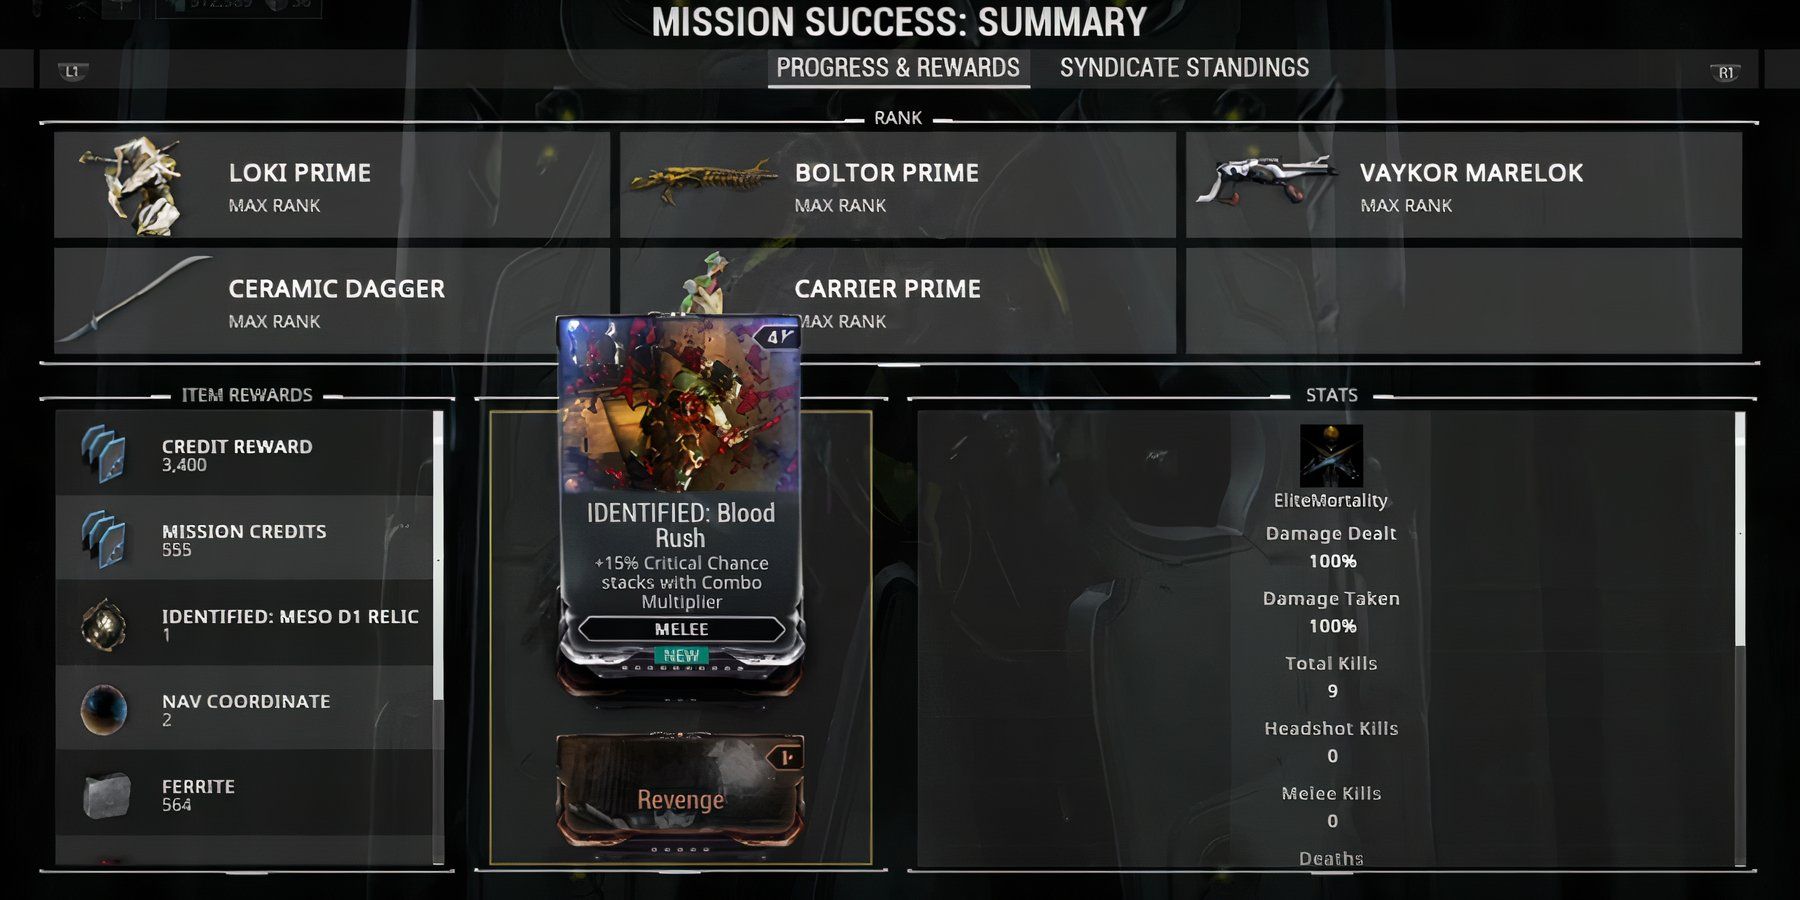 The Warframe character is showing the stats for the Blood Rush mod.